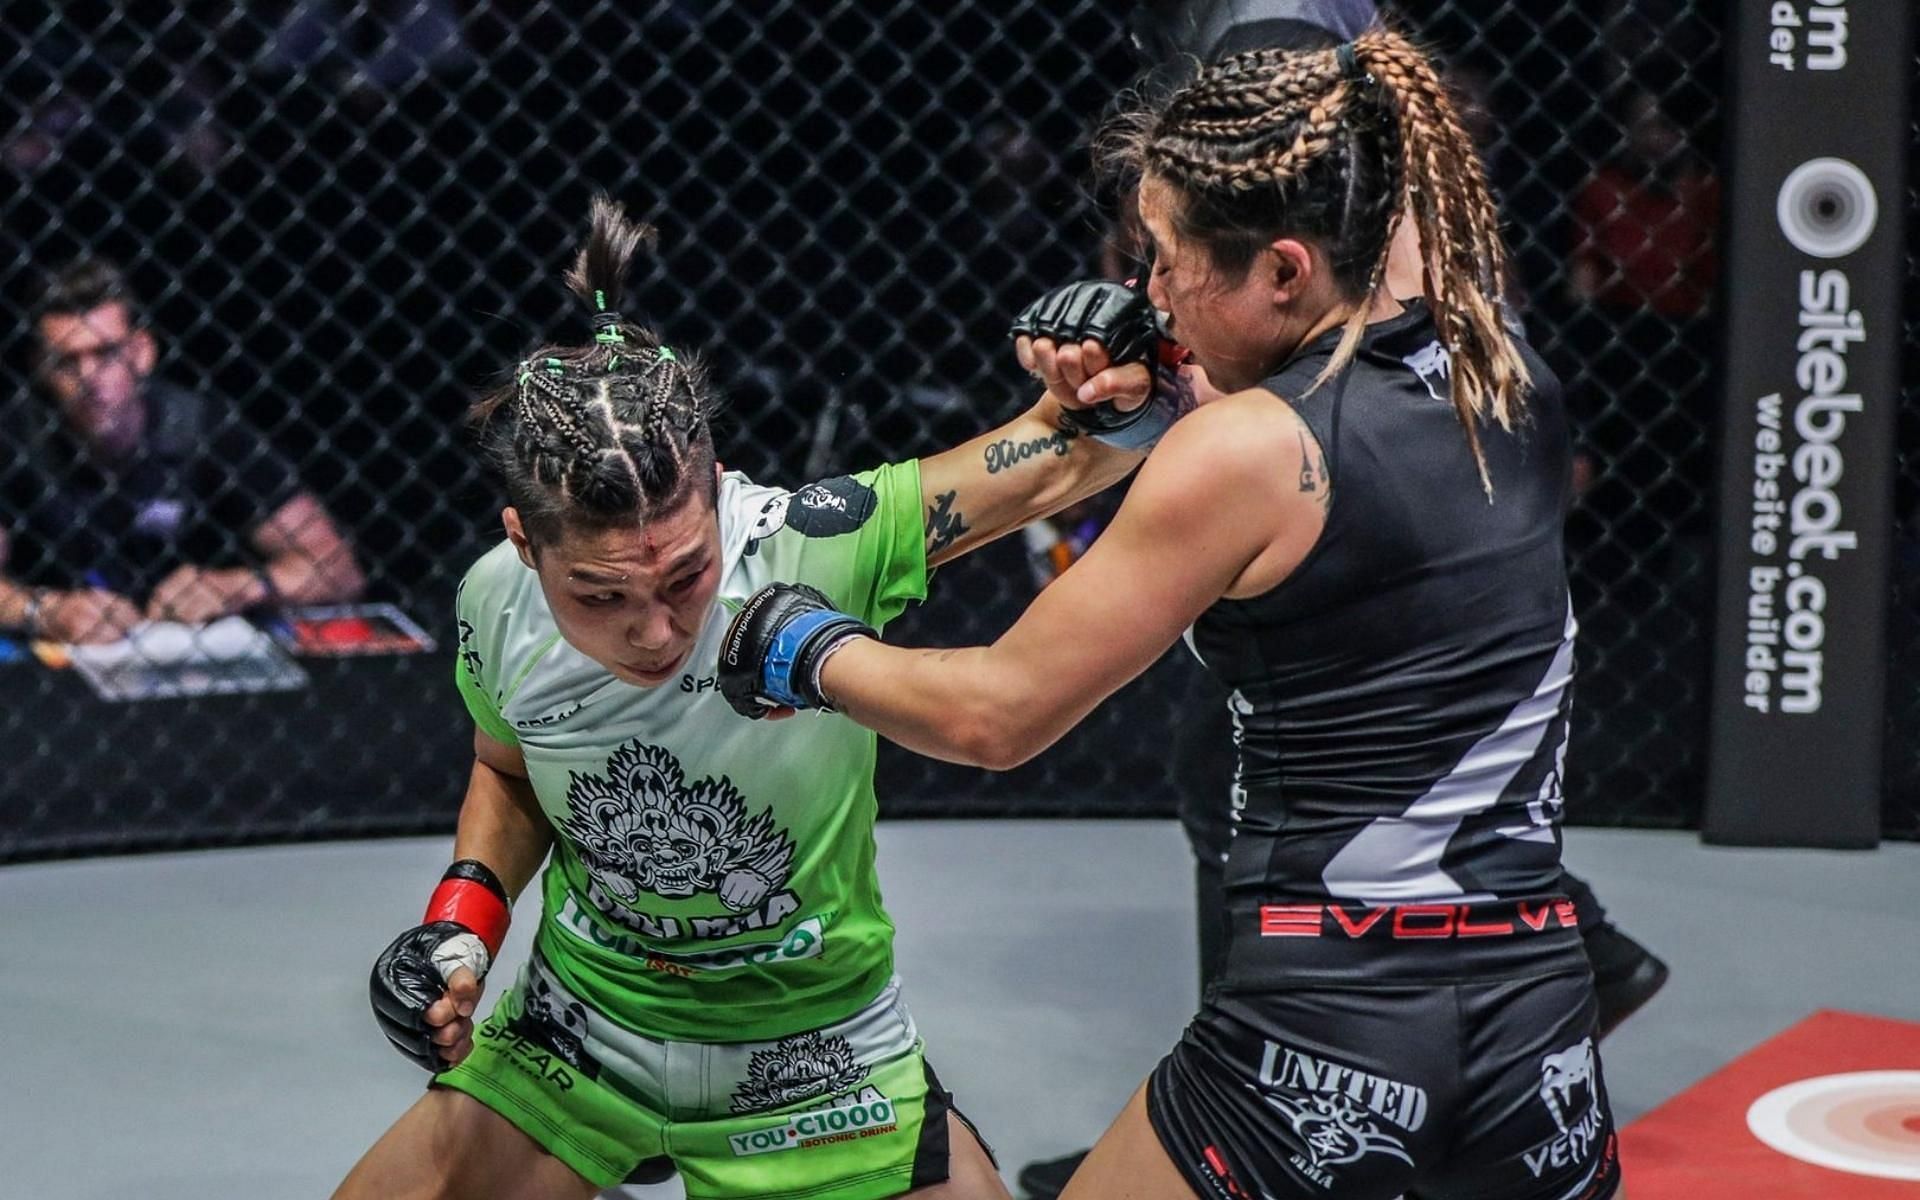 ONE Championship strawweight world champion Xiong Jing Nan (left) and ONE atomweight champion Angela Lee (right) have had one of the most epic rivalries in MMA history. (Image courtesy of ONE Championship)